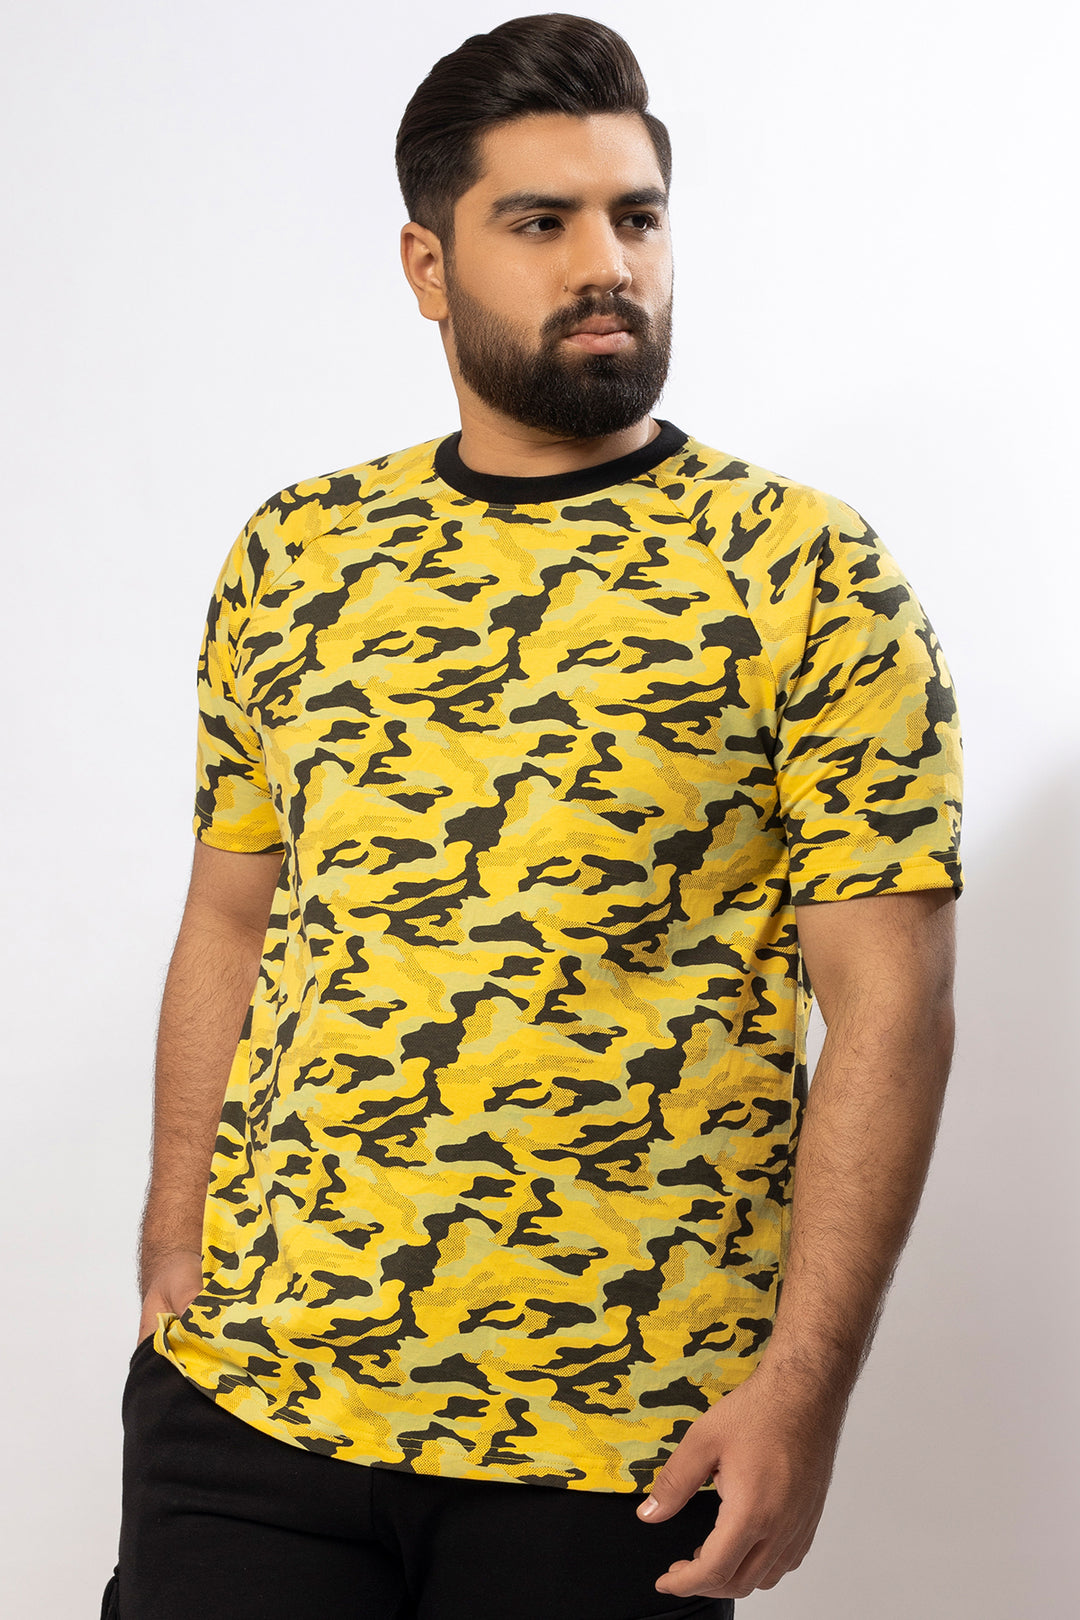 Yellow Camo Printed T-Shirt (Plus Size) - A24 - MT0325P